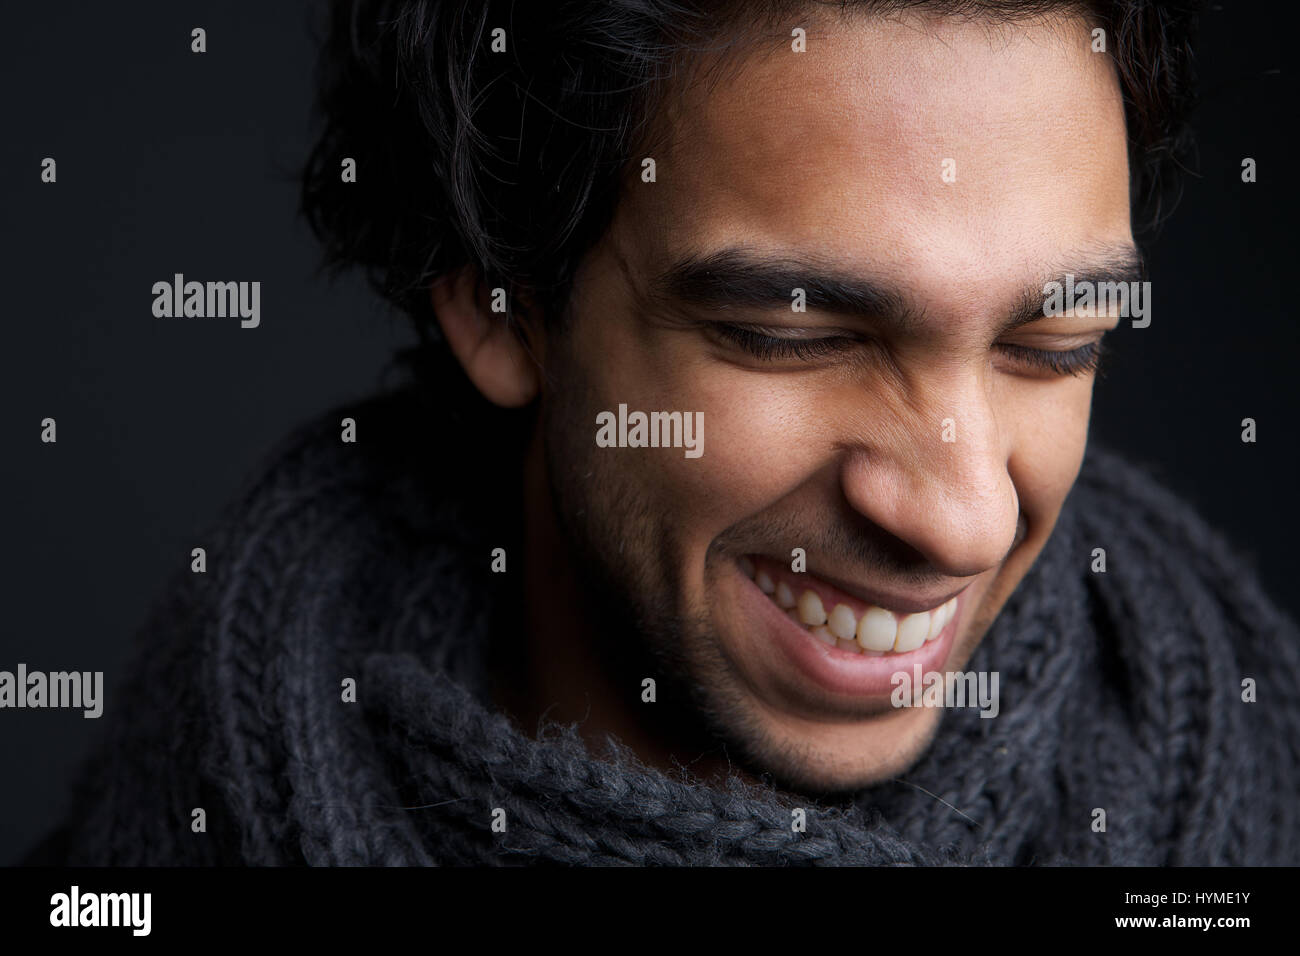 Close up portrait of a young man laughing with gray scarf Stock Photo